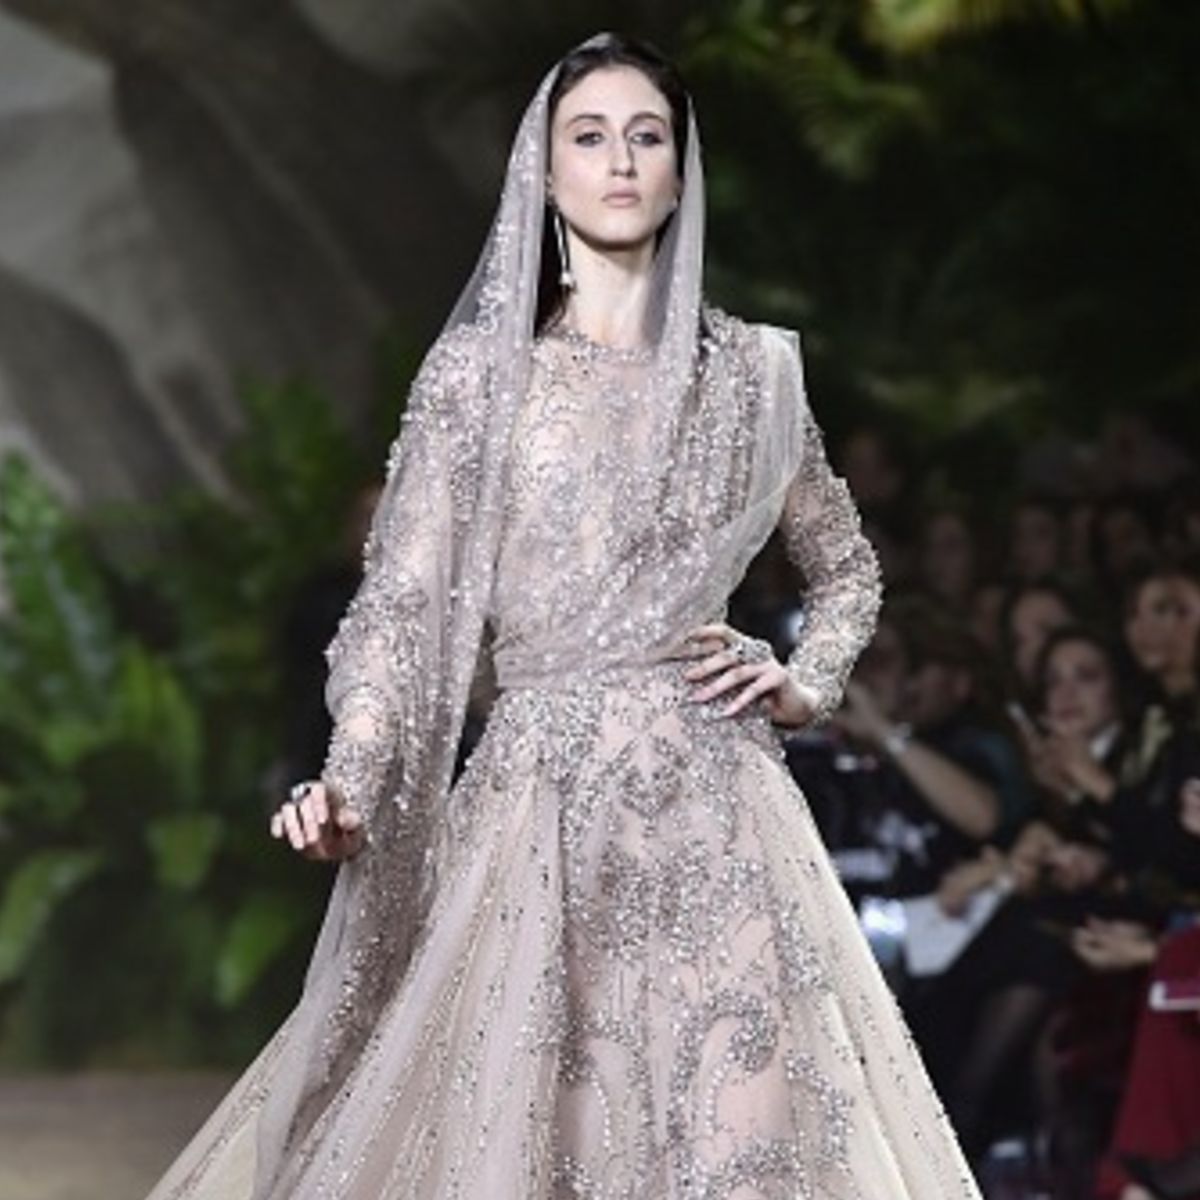 Elie Saab's $300,000 Wedding Dress, And Five More Couture Bridal